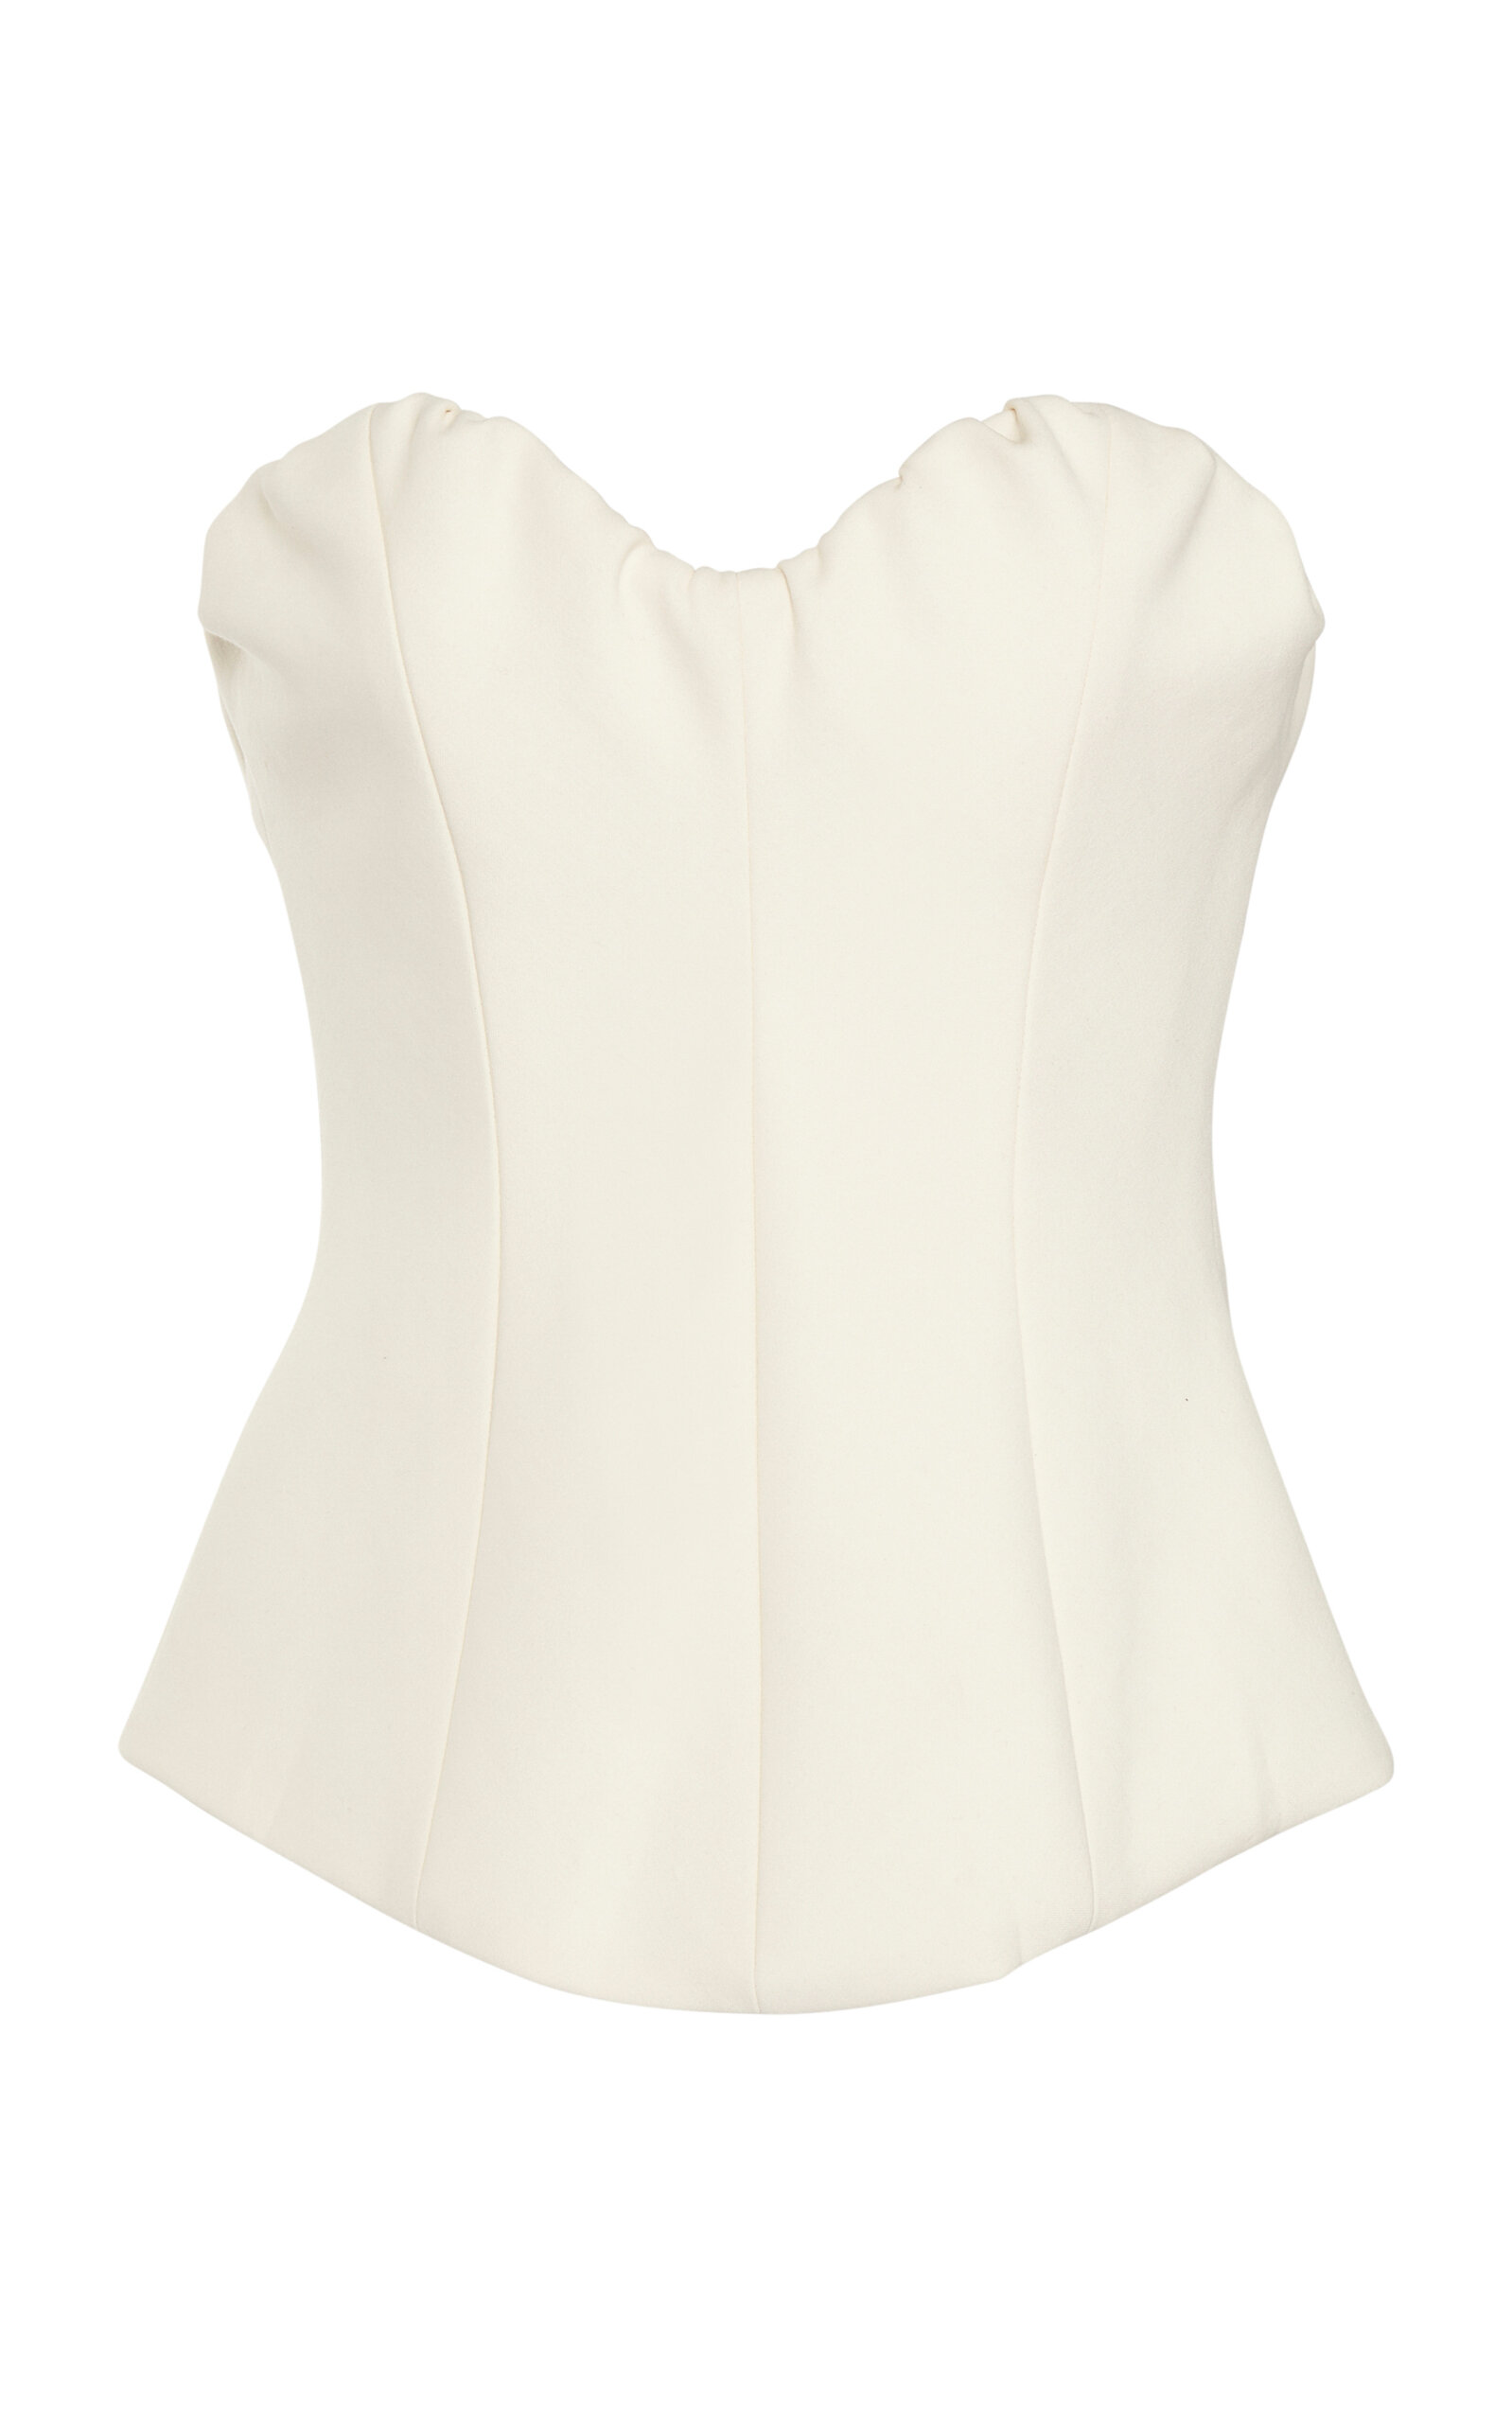 https://www.modaoperandi.com/assets/images/products/979764/620630/large_victoria-beckham-off-white-strapless-cotton-corset-top.jpg?_t=1696461634